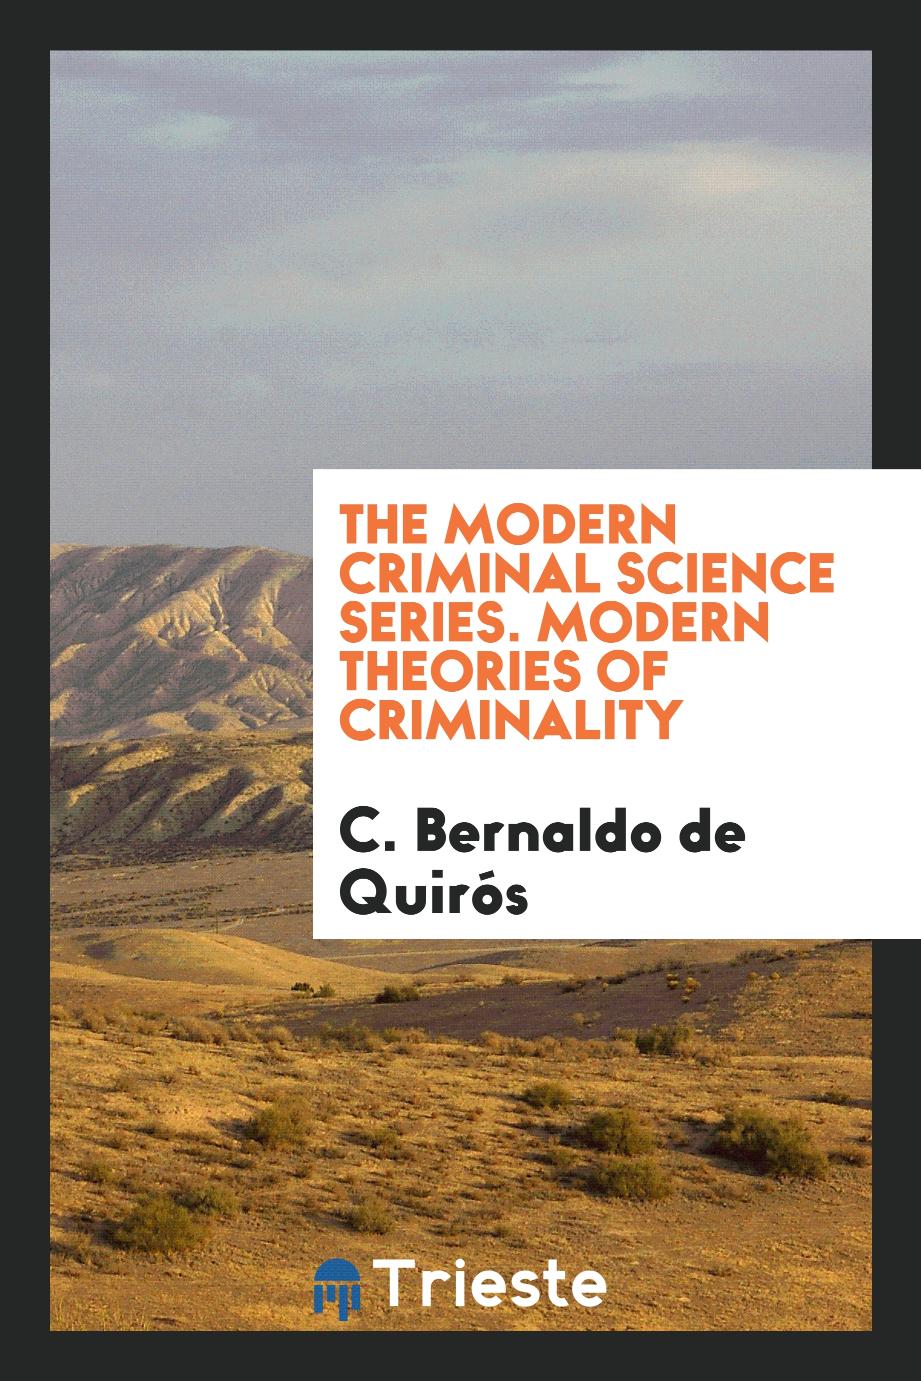 The modern criminal science series. Modern theories of criminality